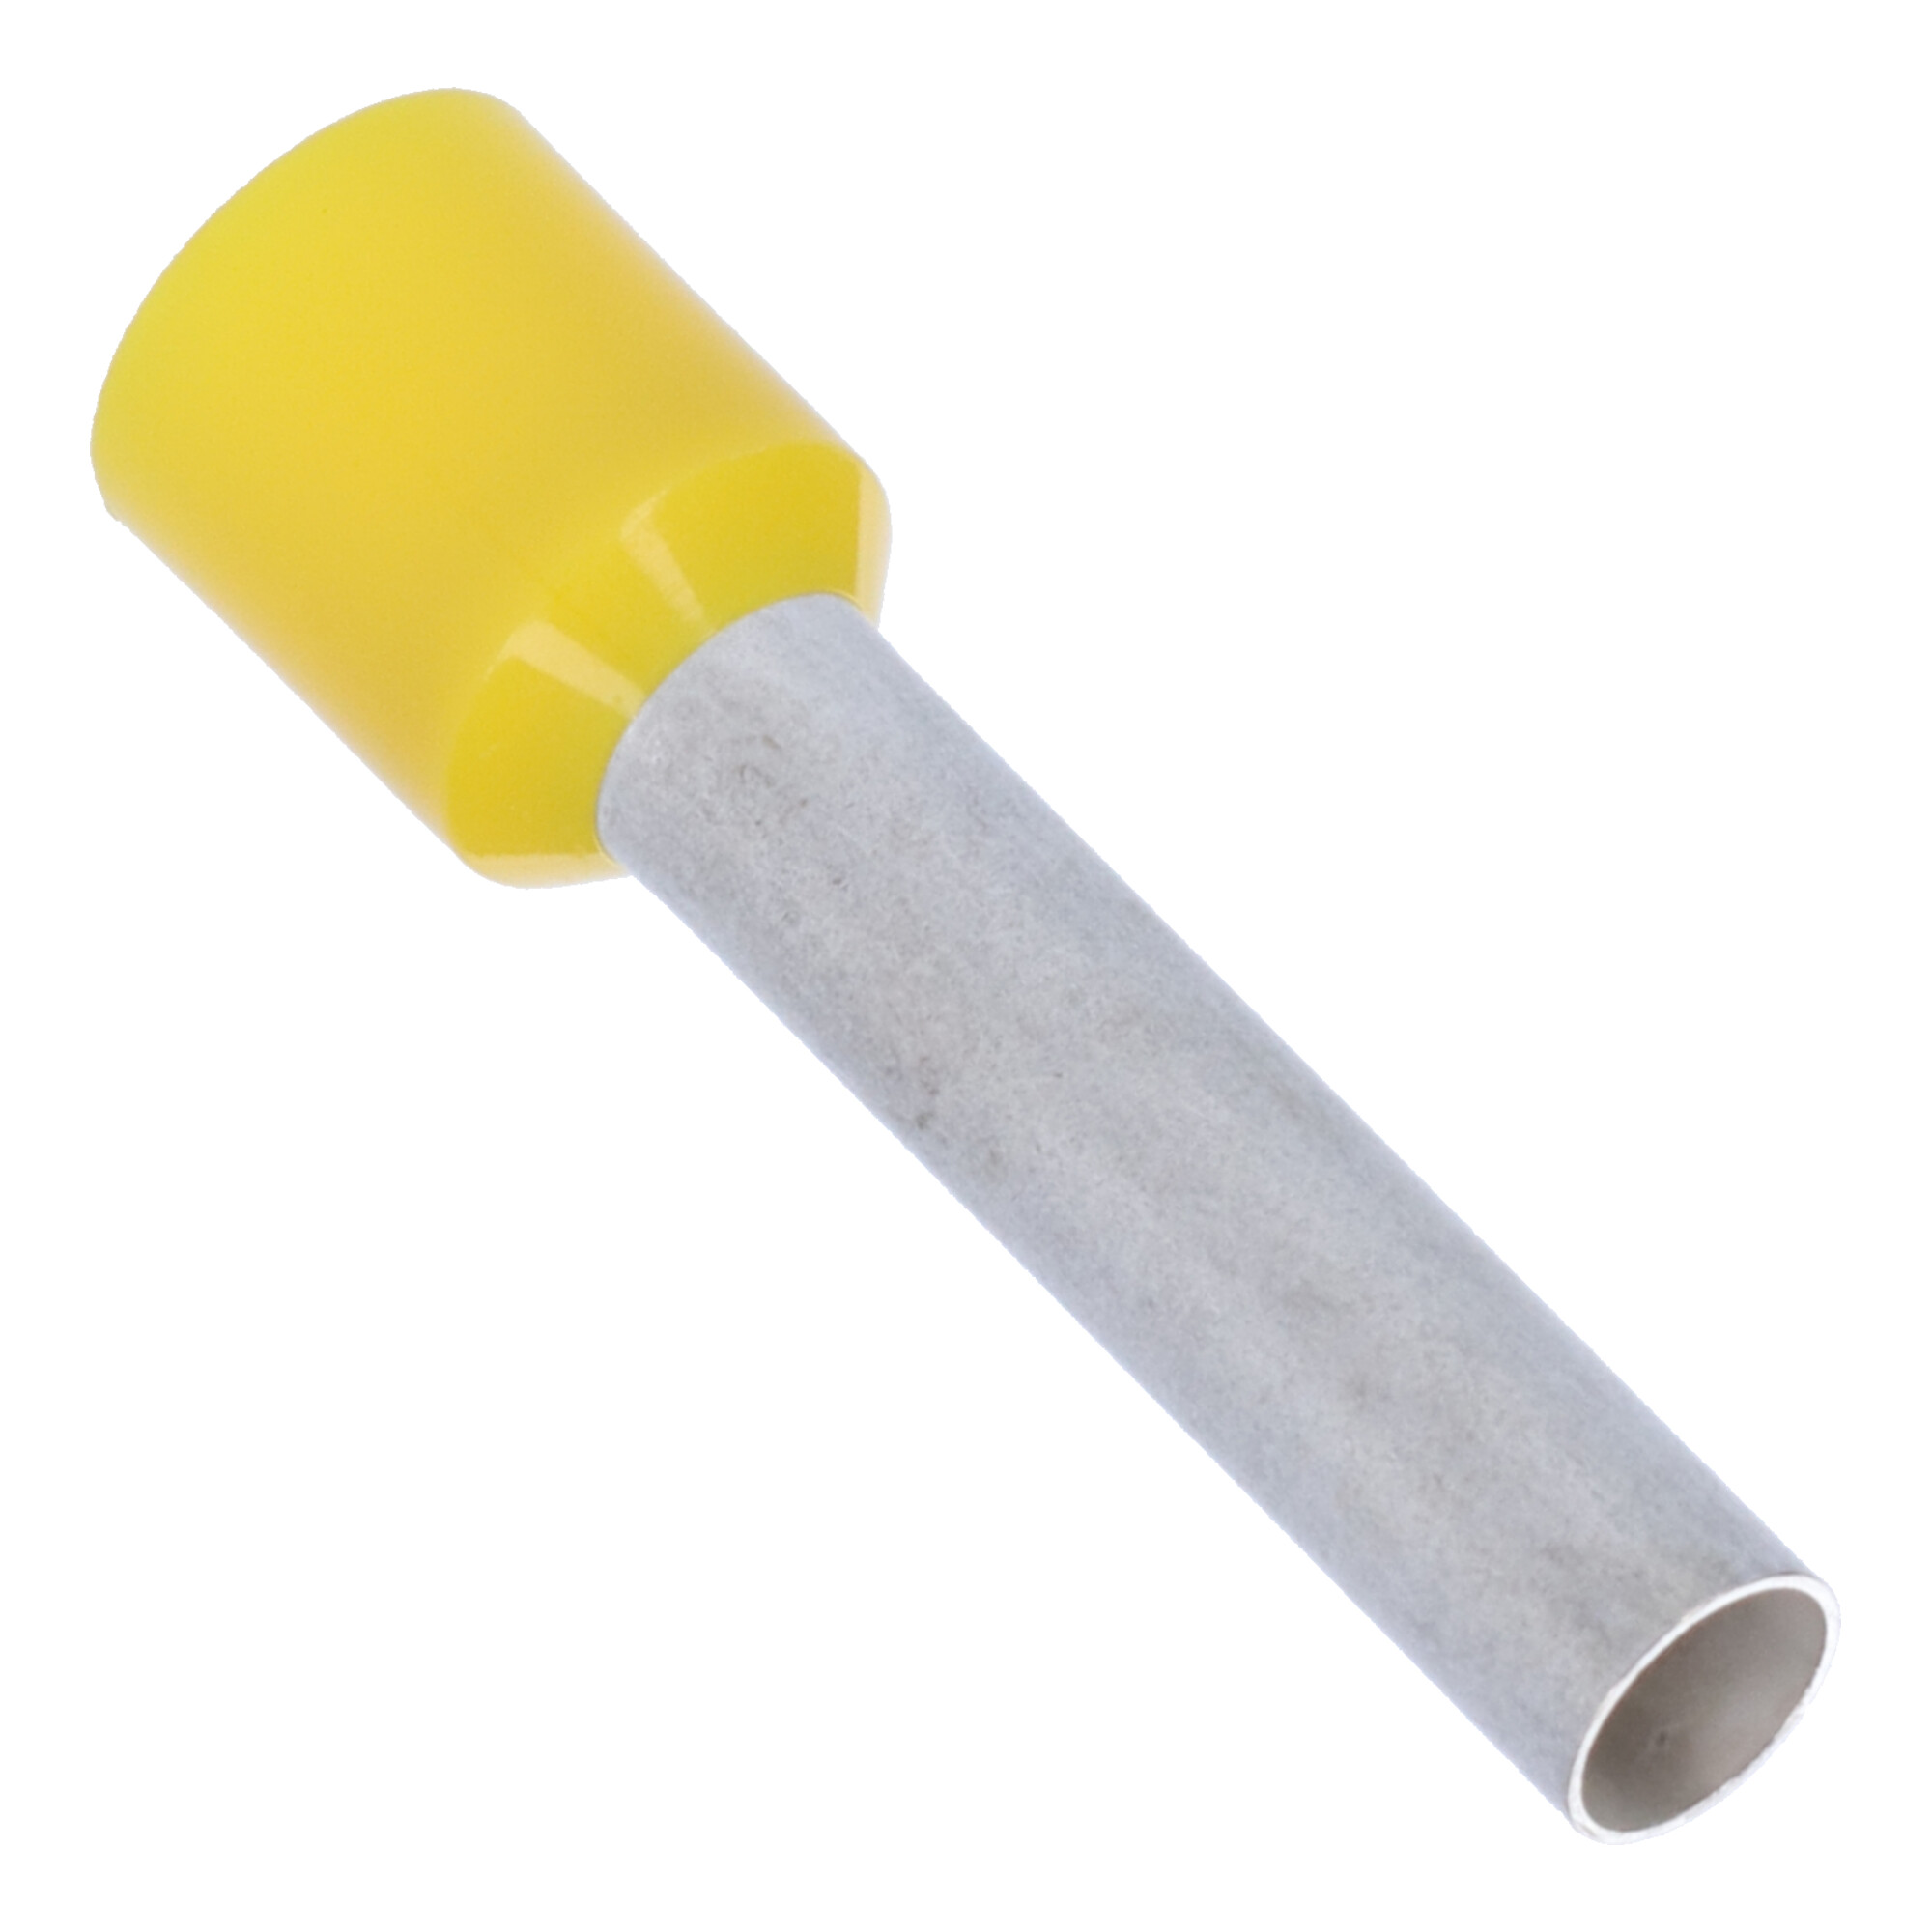 15-00285 Insulated wire end sleeve